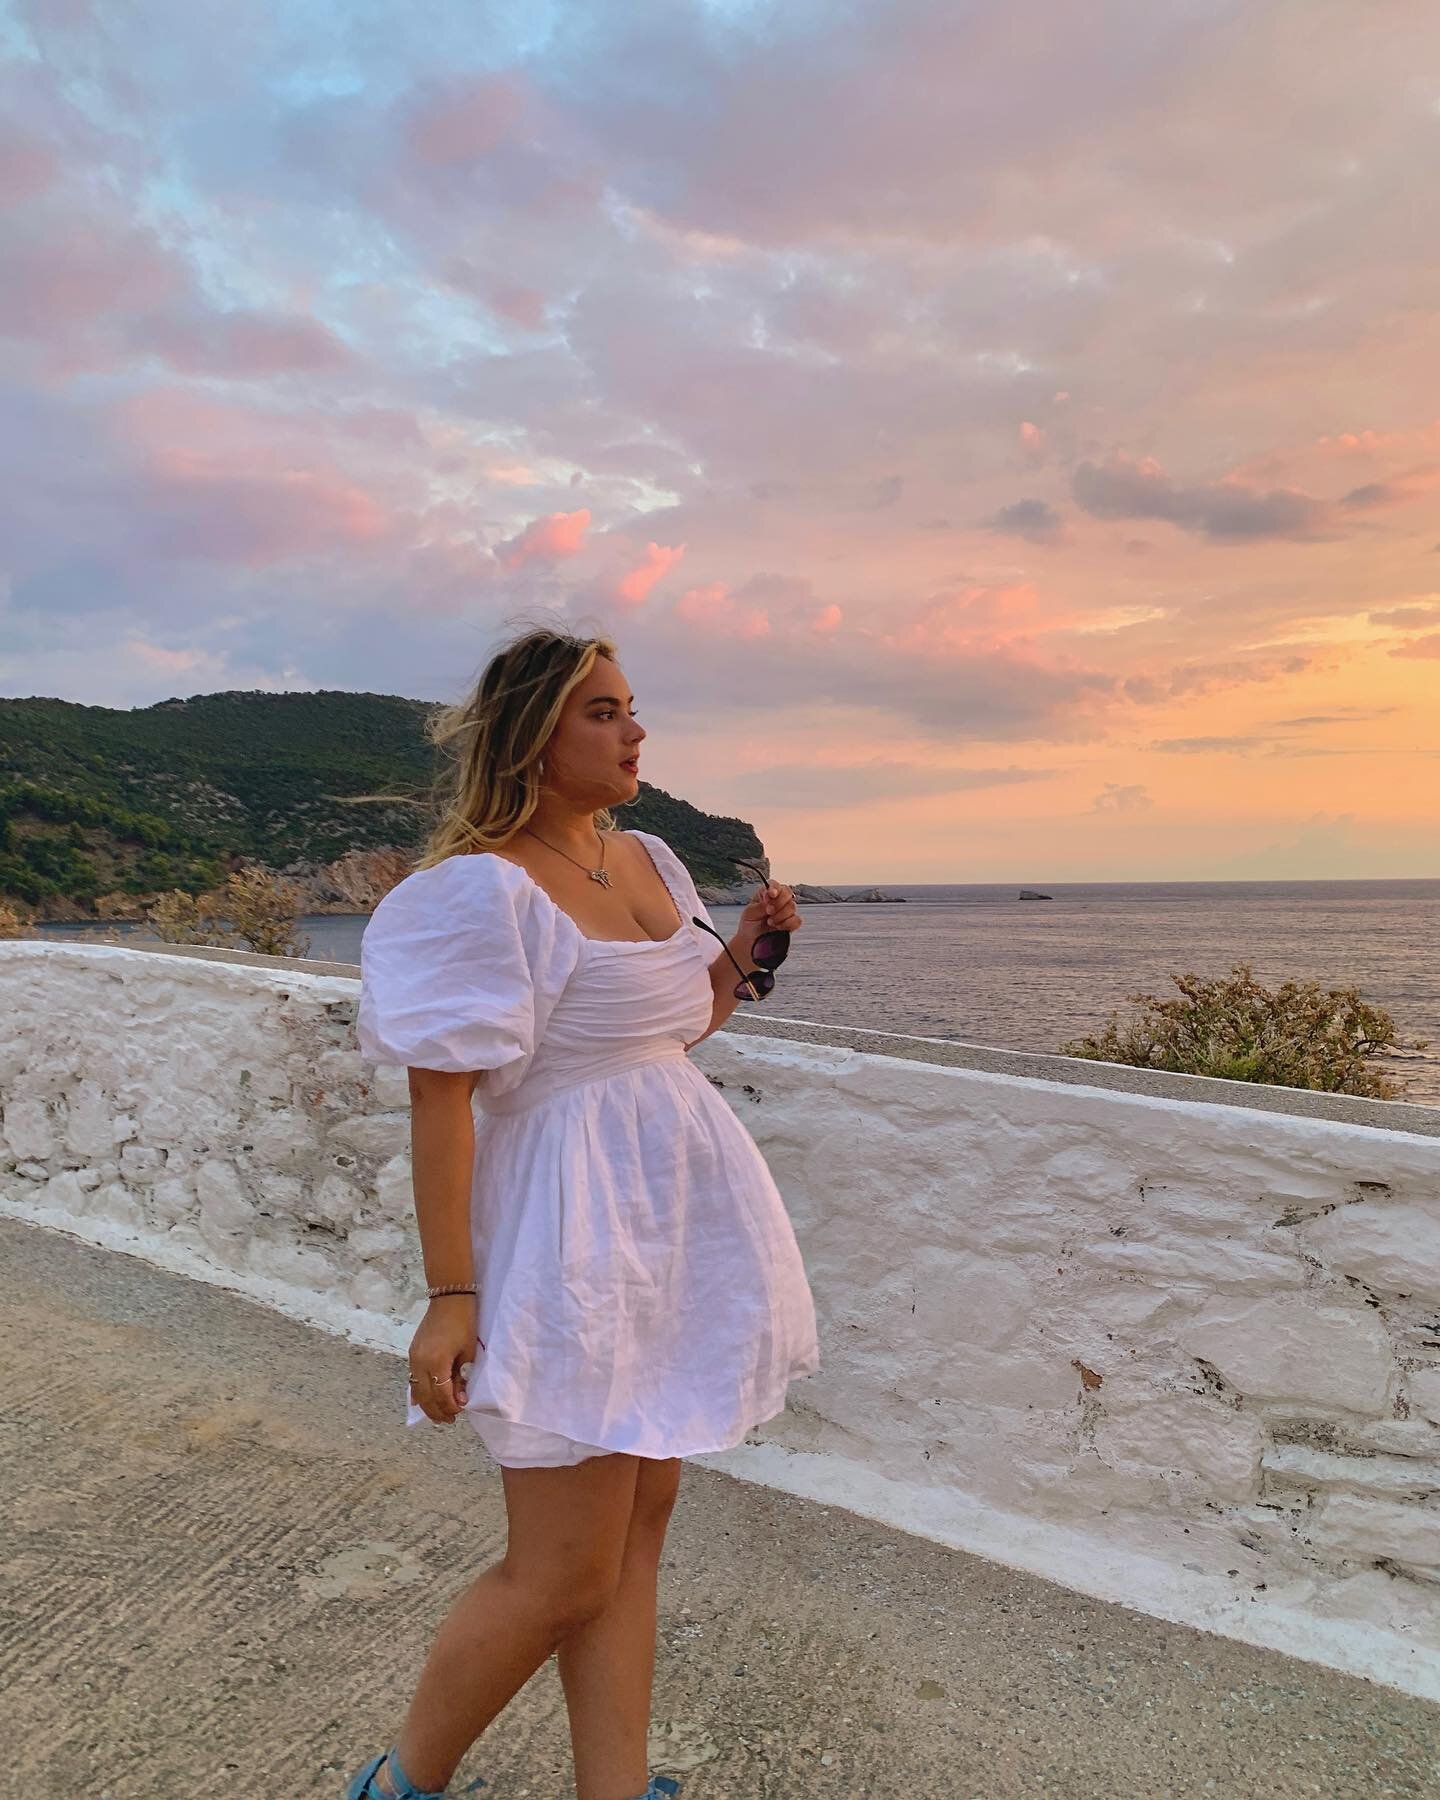 let&rsquo;s hear it one more time for the dress and this flawless grecian view🫶🏼✨🇬🇷
.
.
.
#travel #greece #solotravel #skopelos #mammamia #mammamiaisland #greekislands #grecian #summer #ootd #travelfashion #travelphotography #travelvlog #santorin